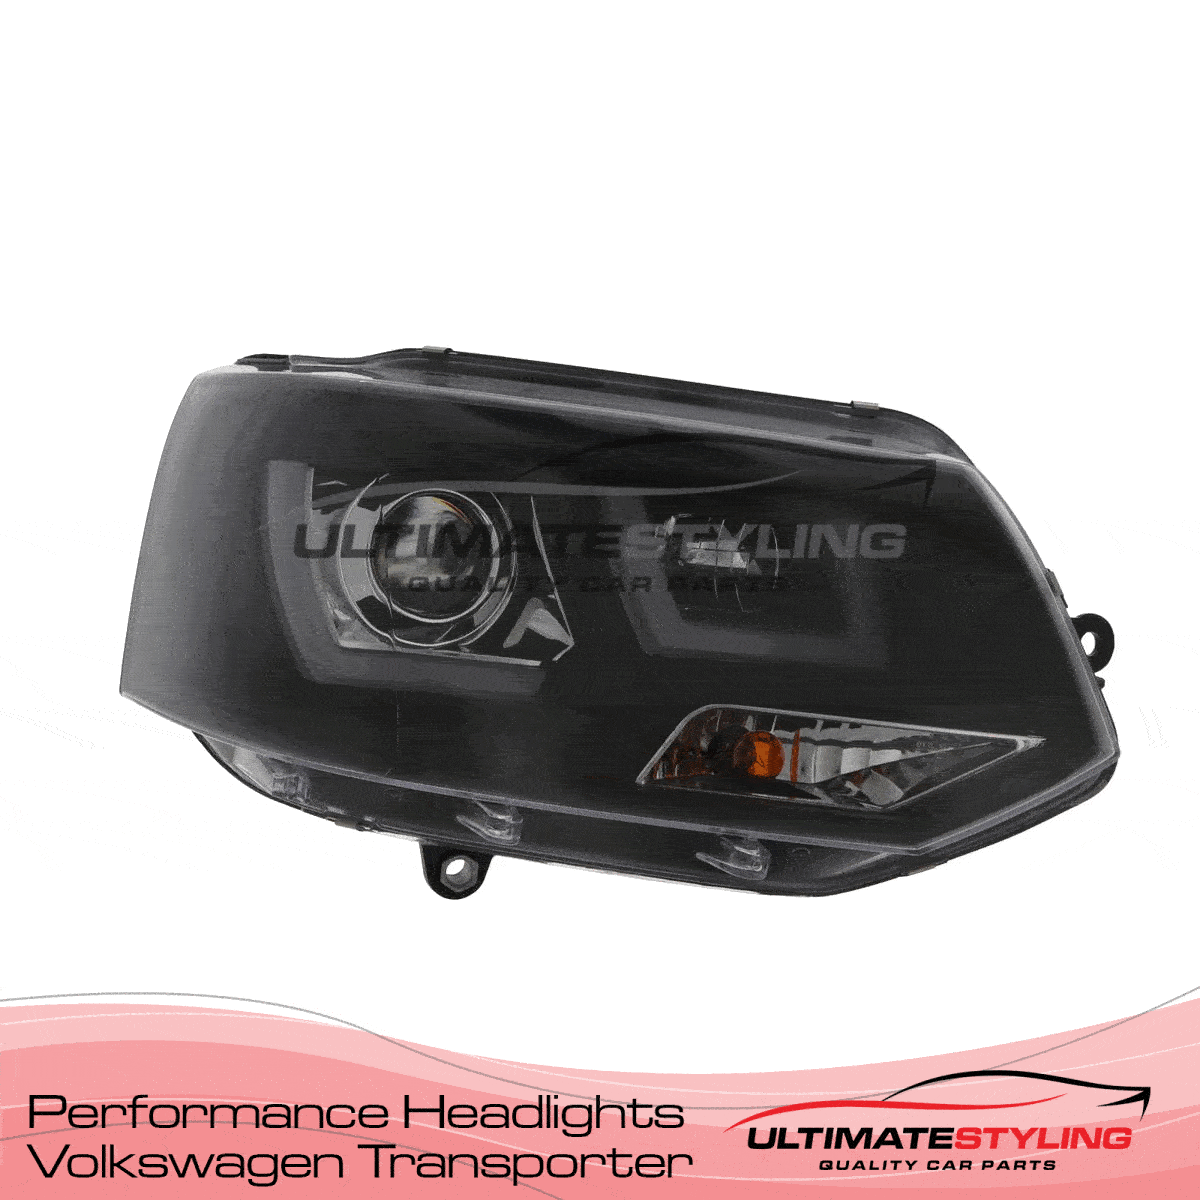 360 view of a VW Transporter aftermarket headlight upgrade